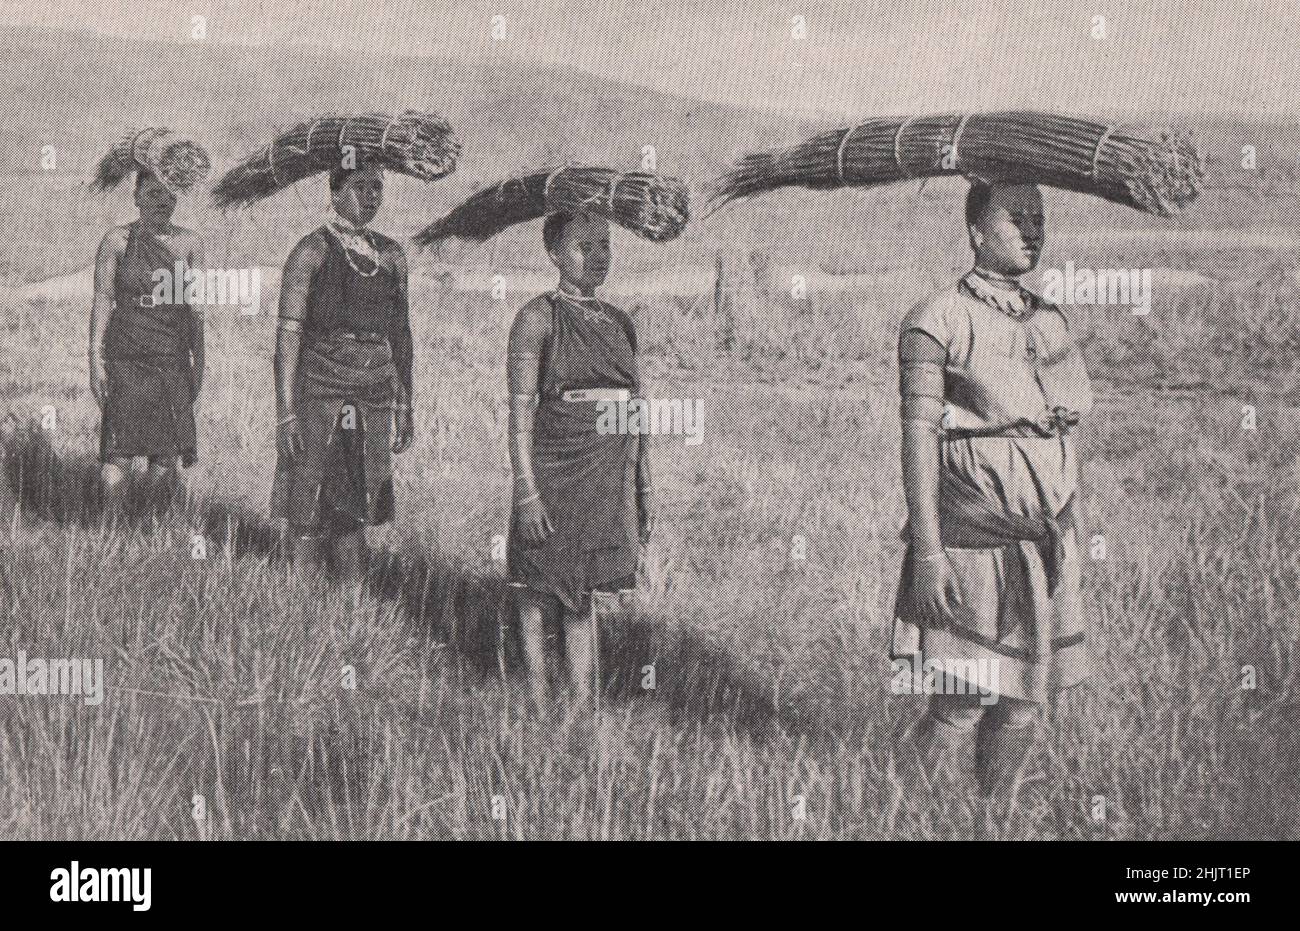 South Africa: Native women carrying bundles of grass (1923) Stock Photo